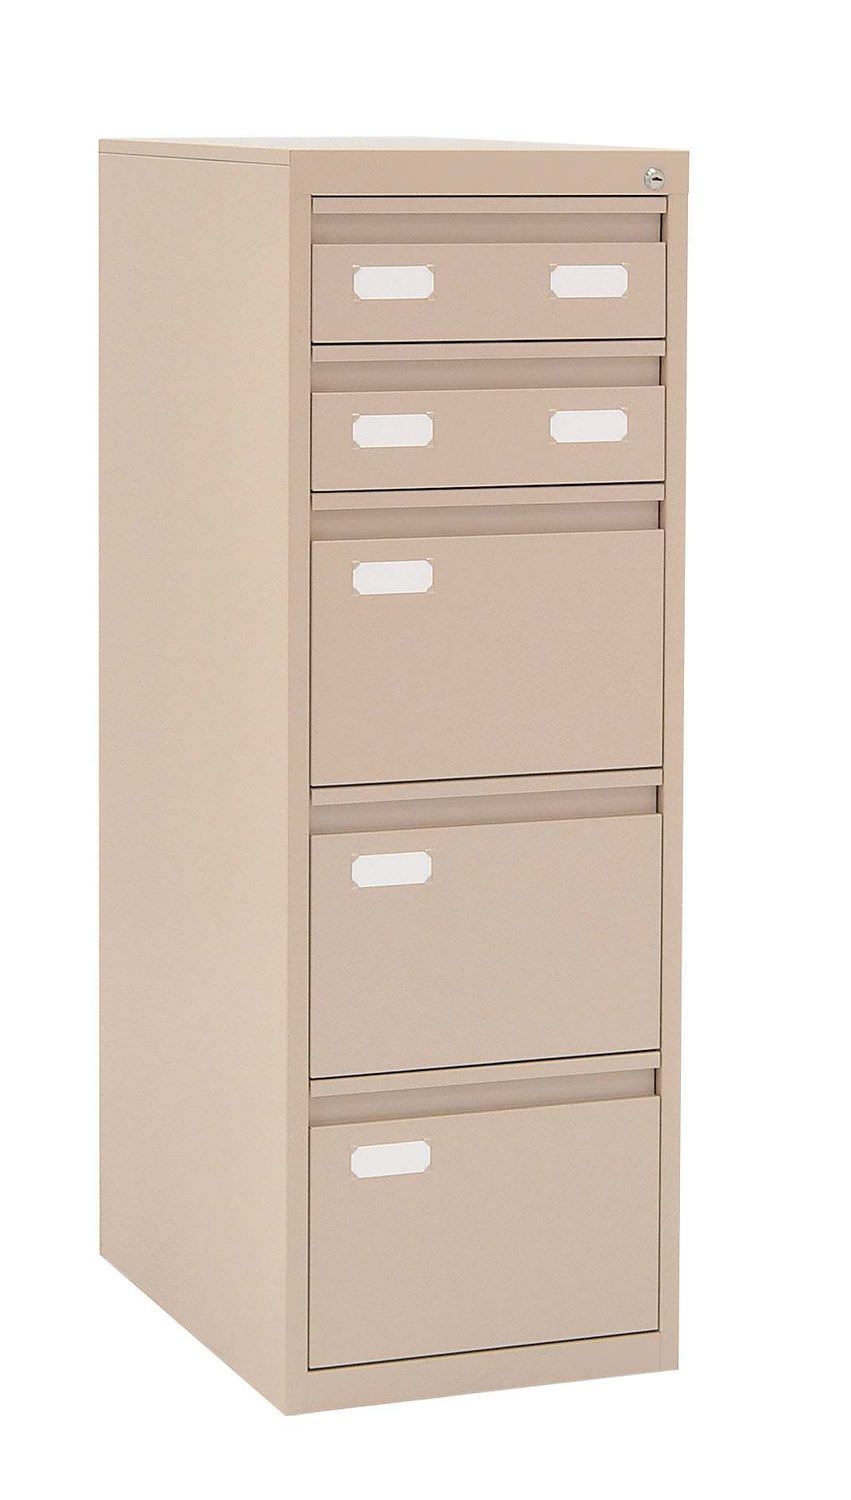 Storing cabinet / mounted for medical records / medical office / with drawer 2012 Inmoclinc